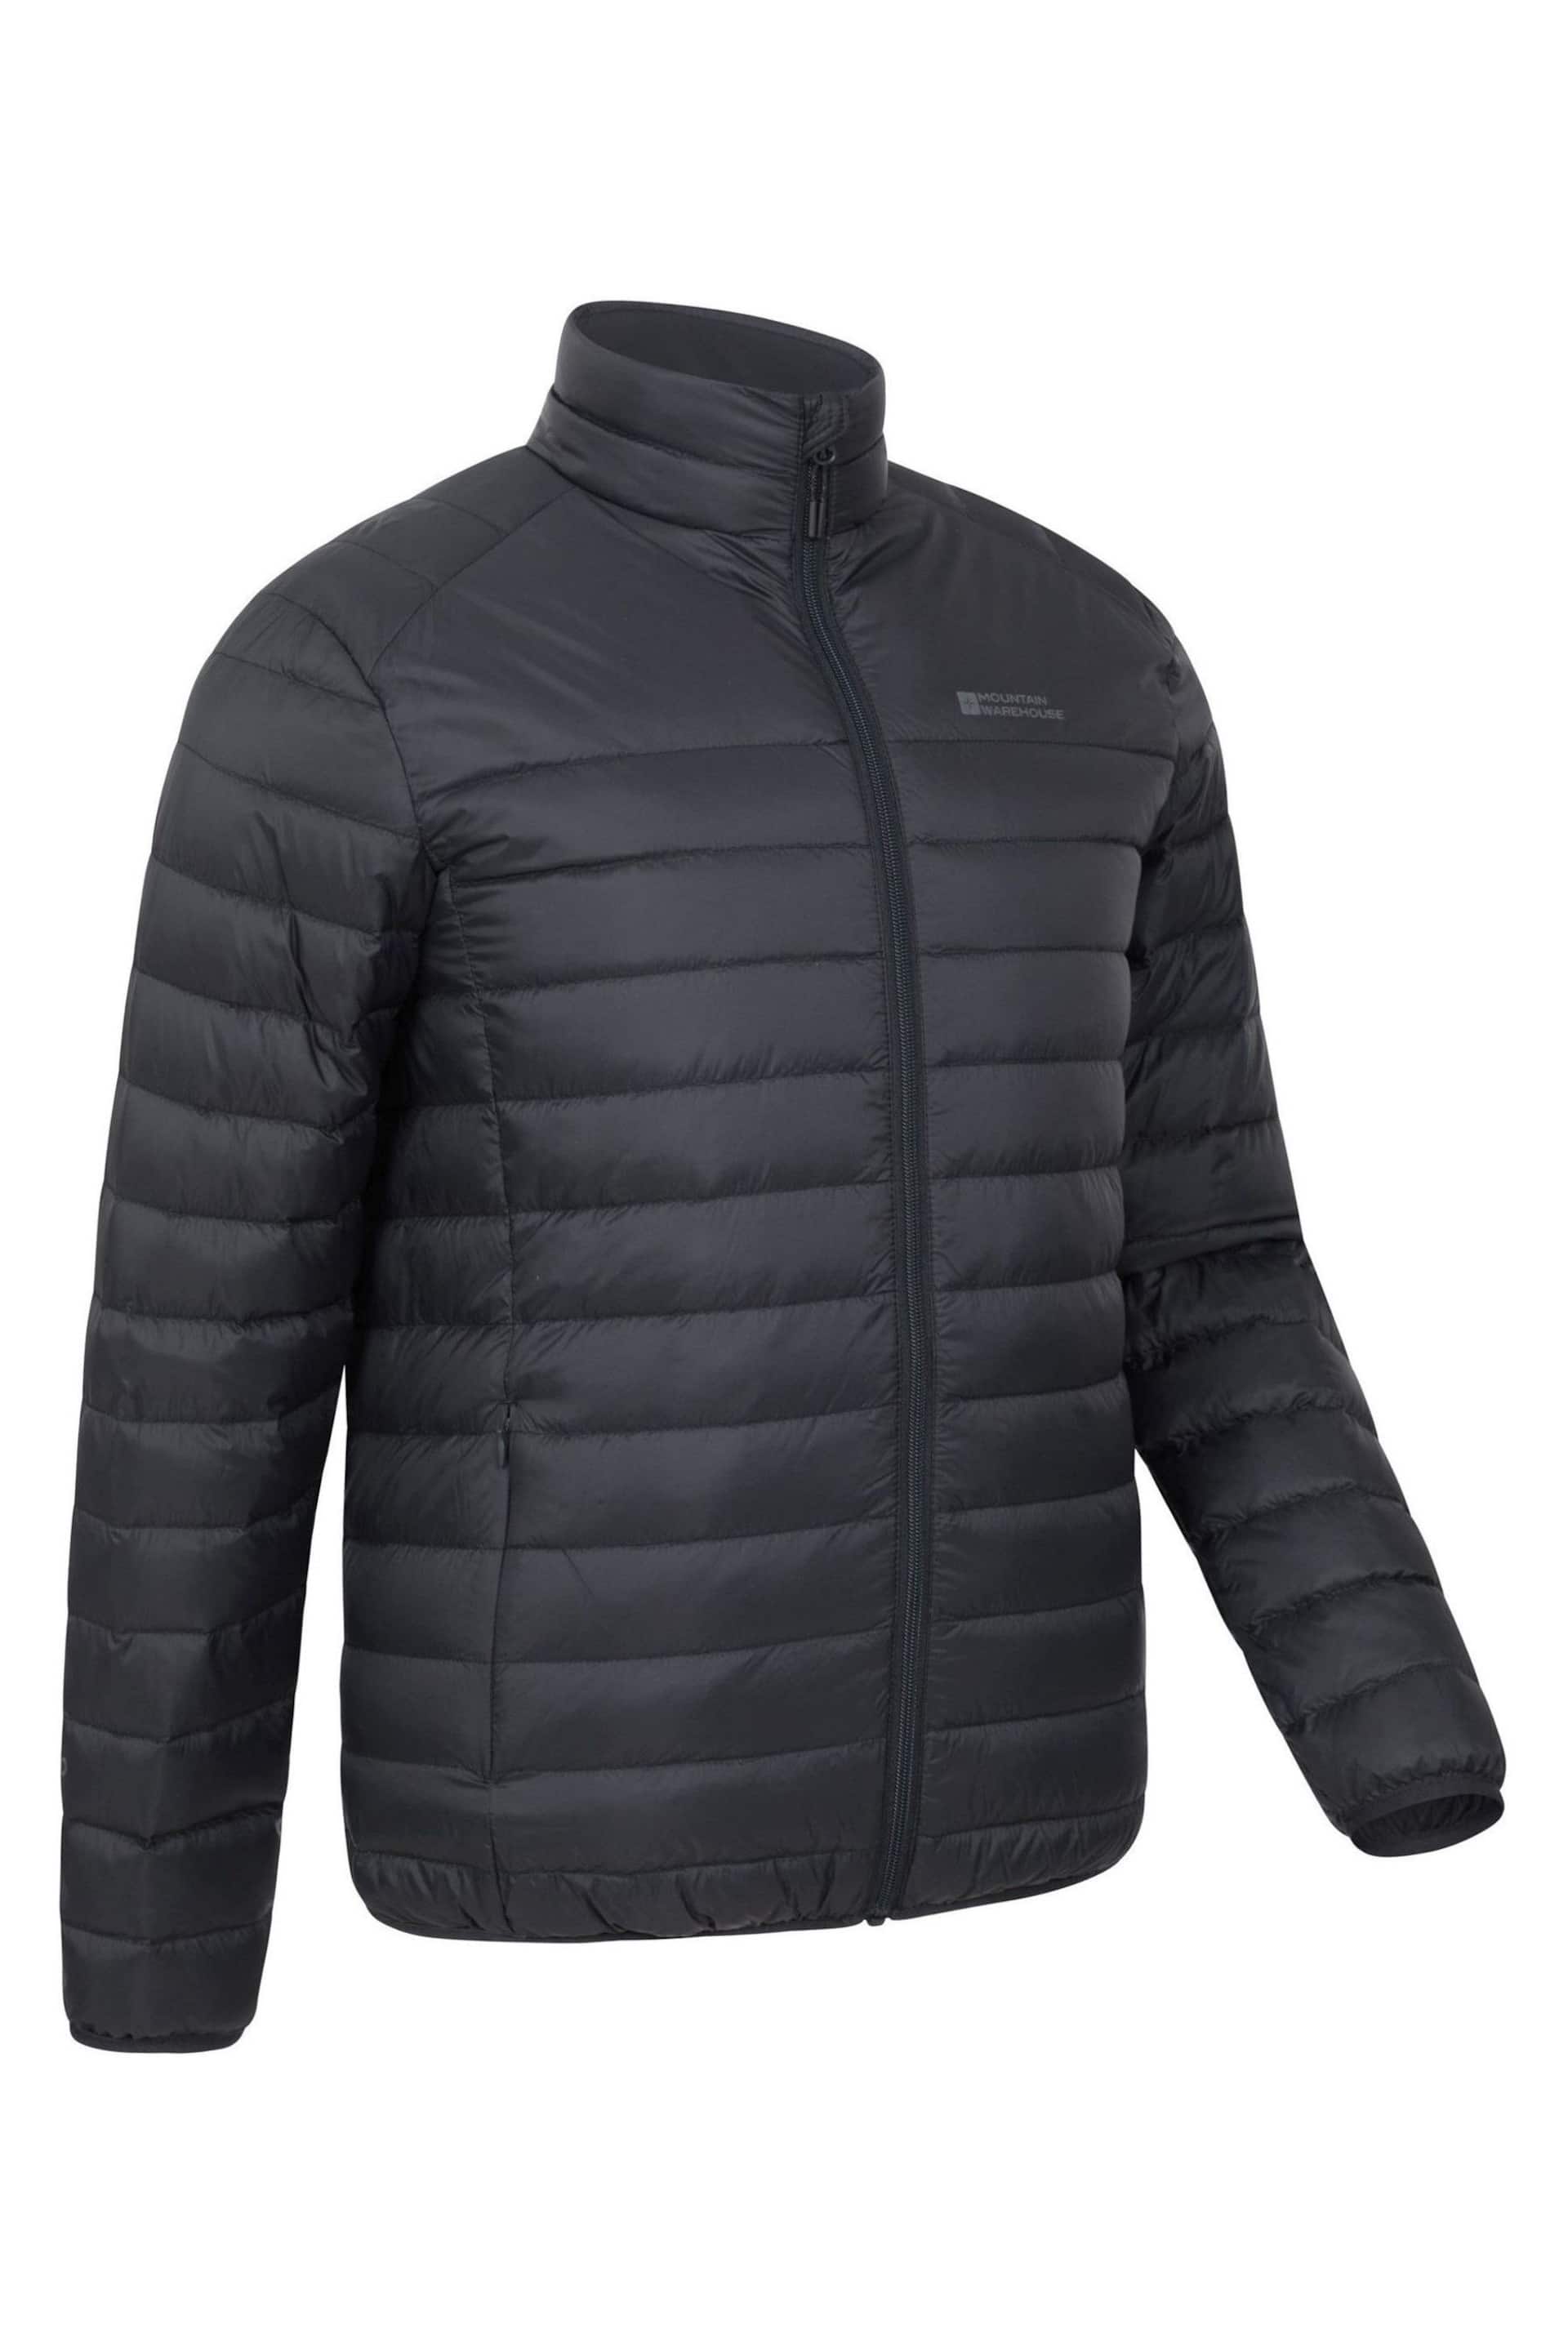 Mountain Warehouse Black Featherweight Down Mens Jacket - Image 1 of 5